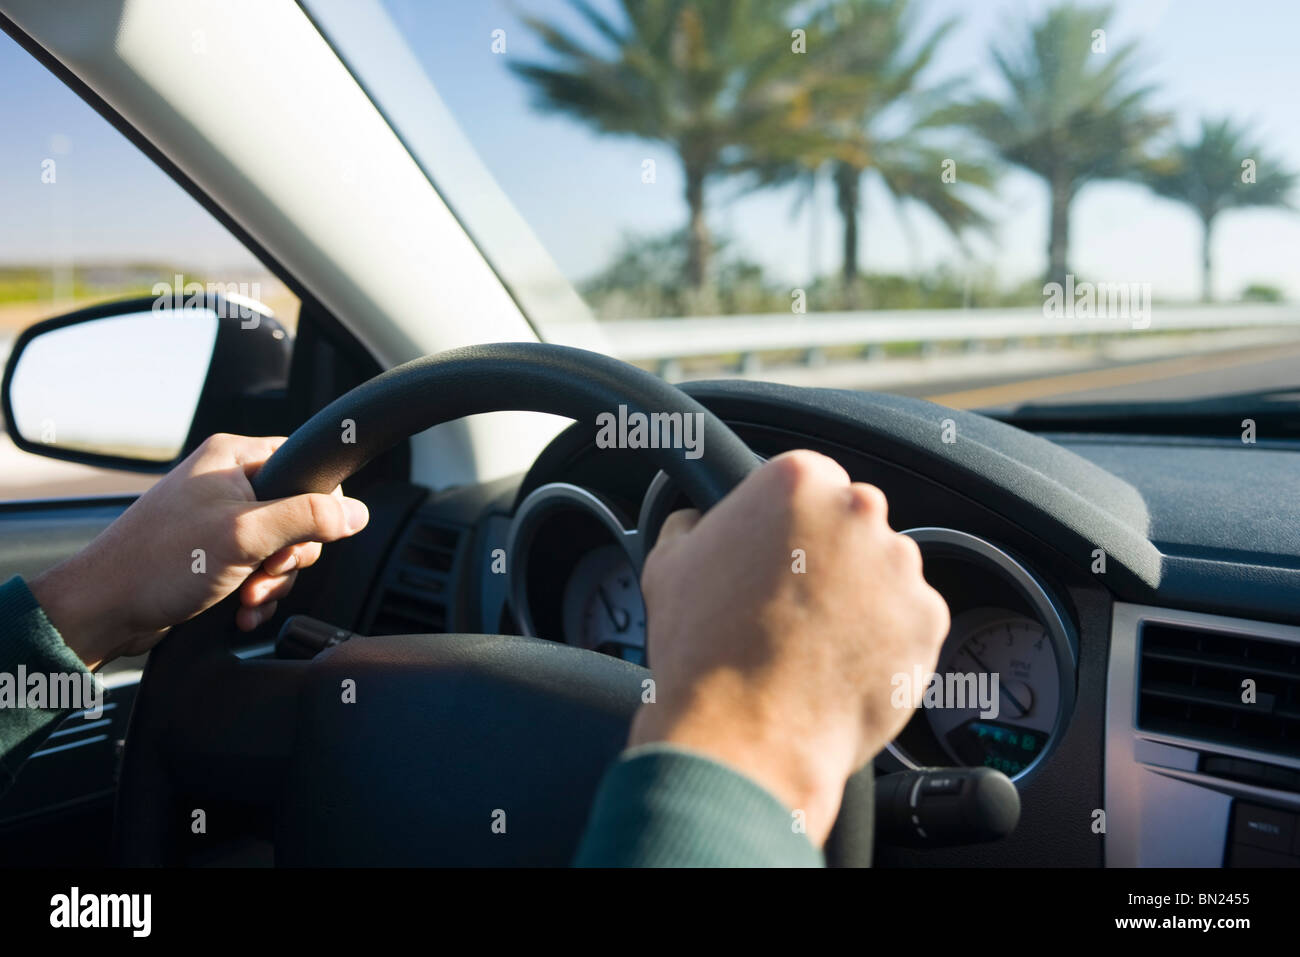 Driving with both hands on steering wheel Stock Photo